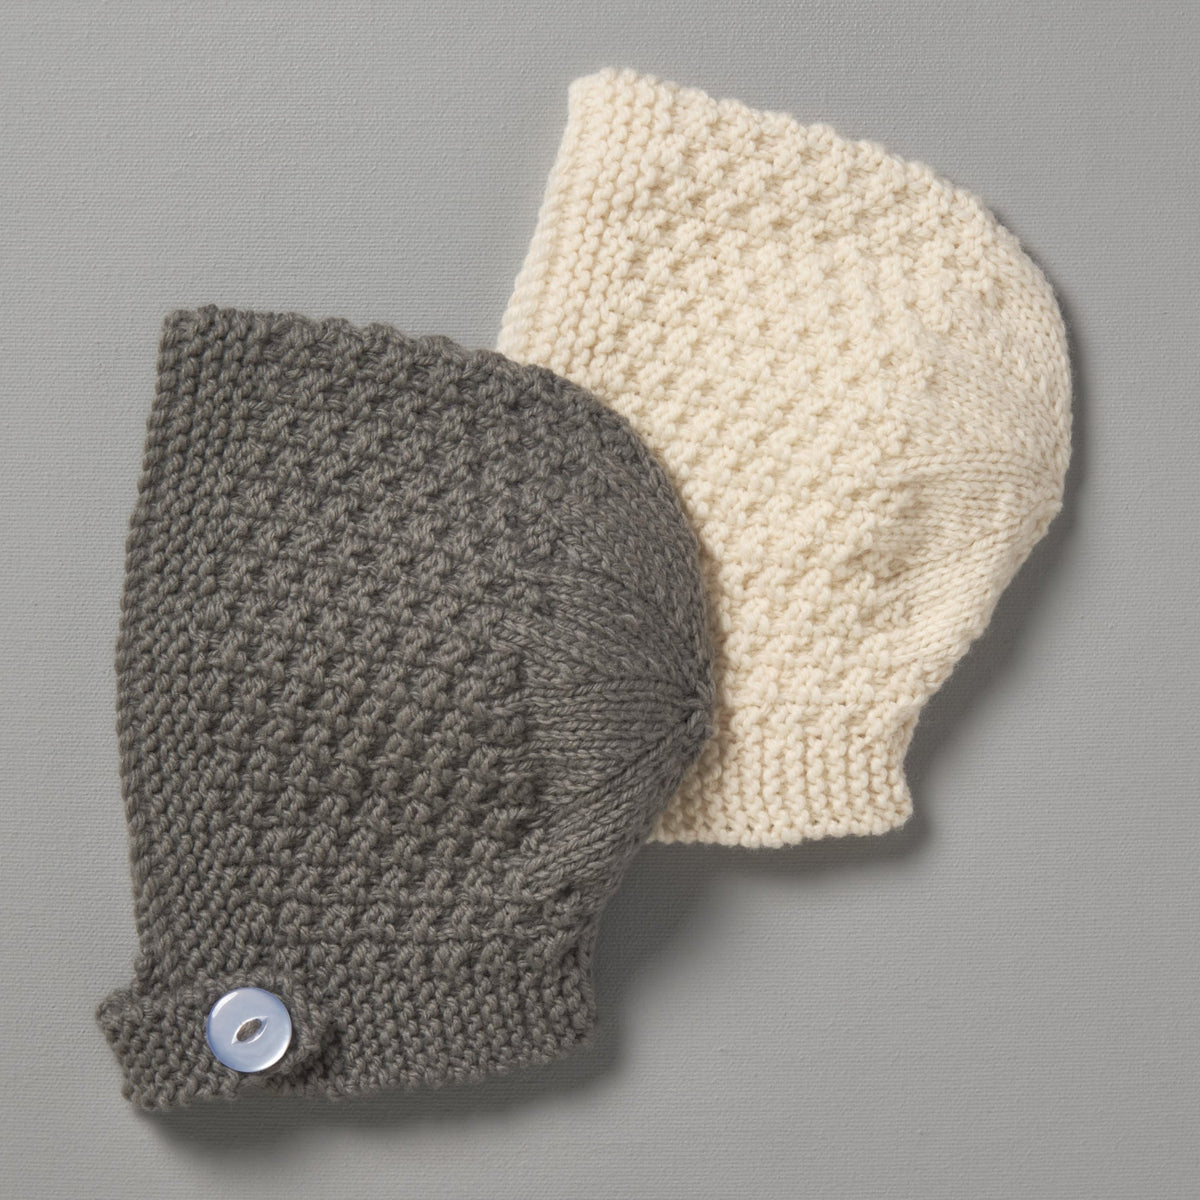 Two Weebits Hand Knitted Baby Bonnets on a gray surface.